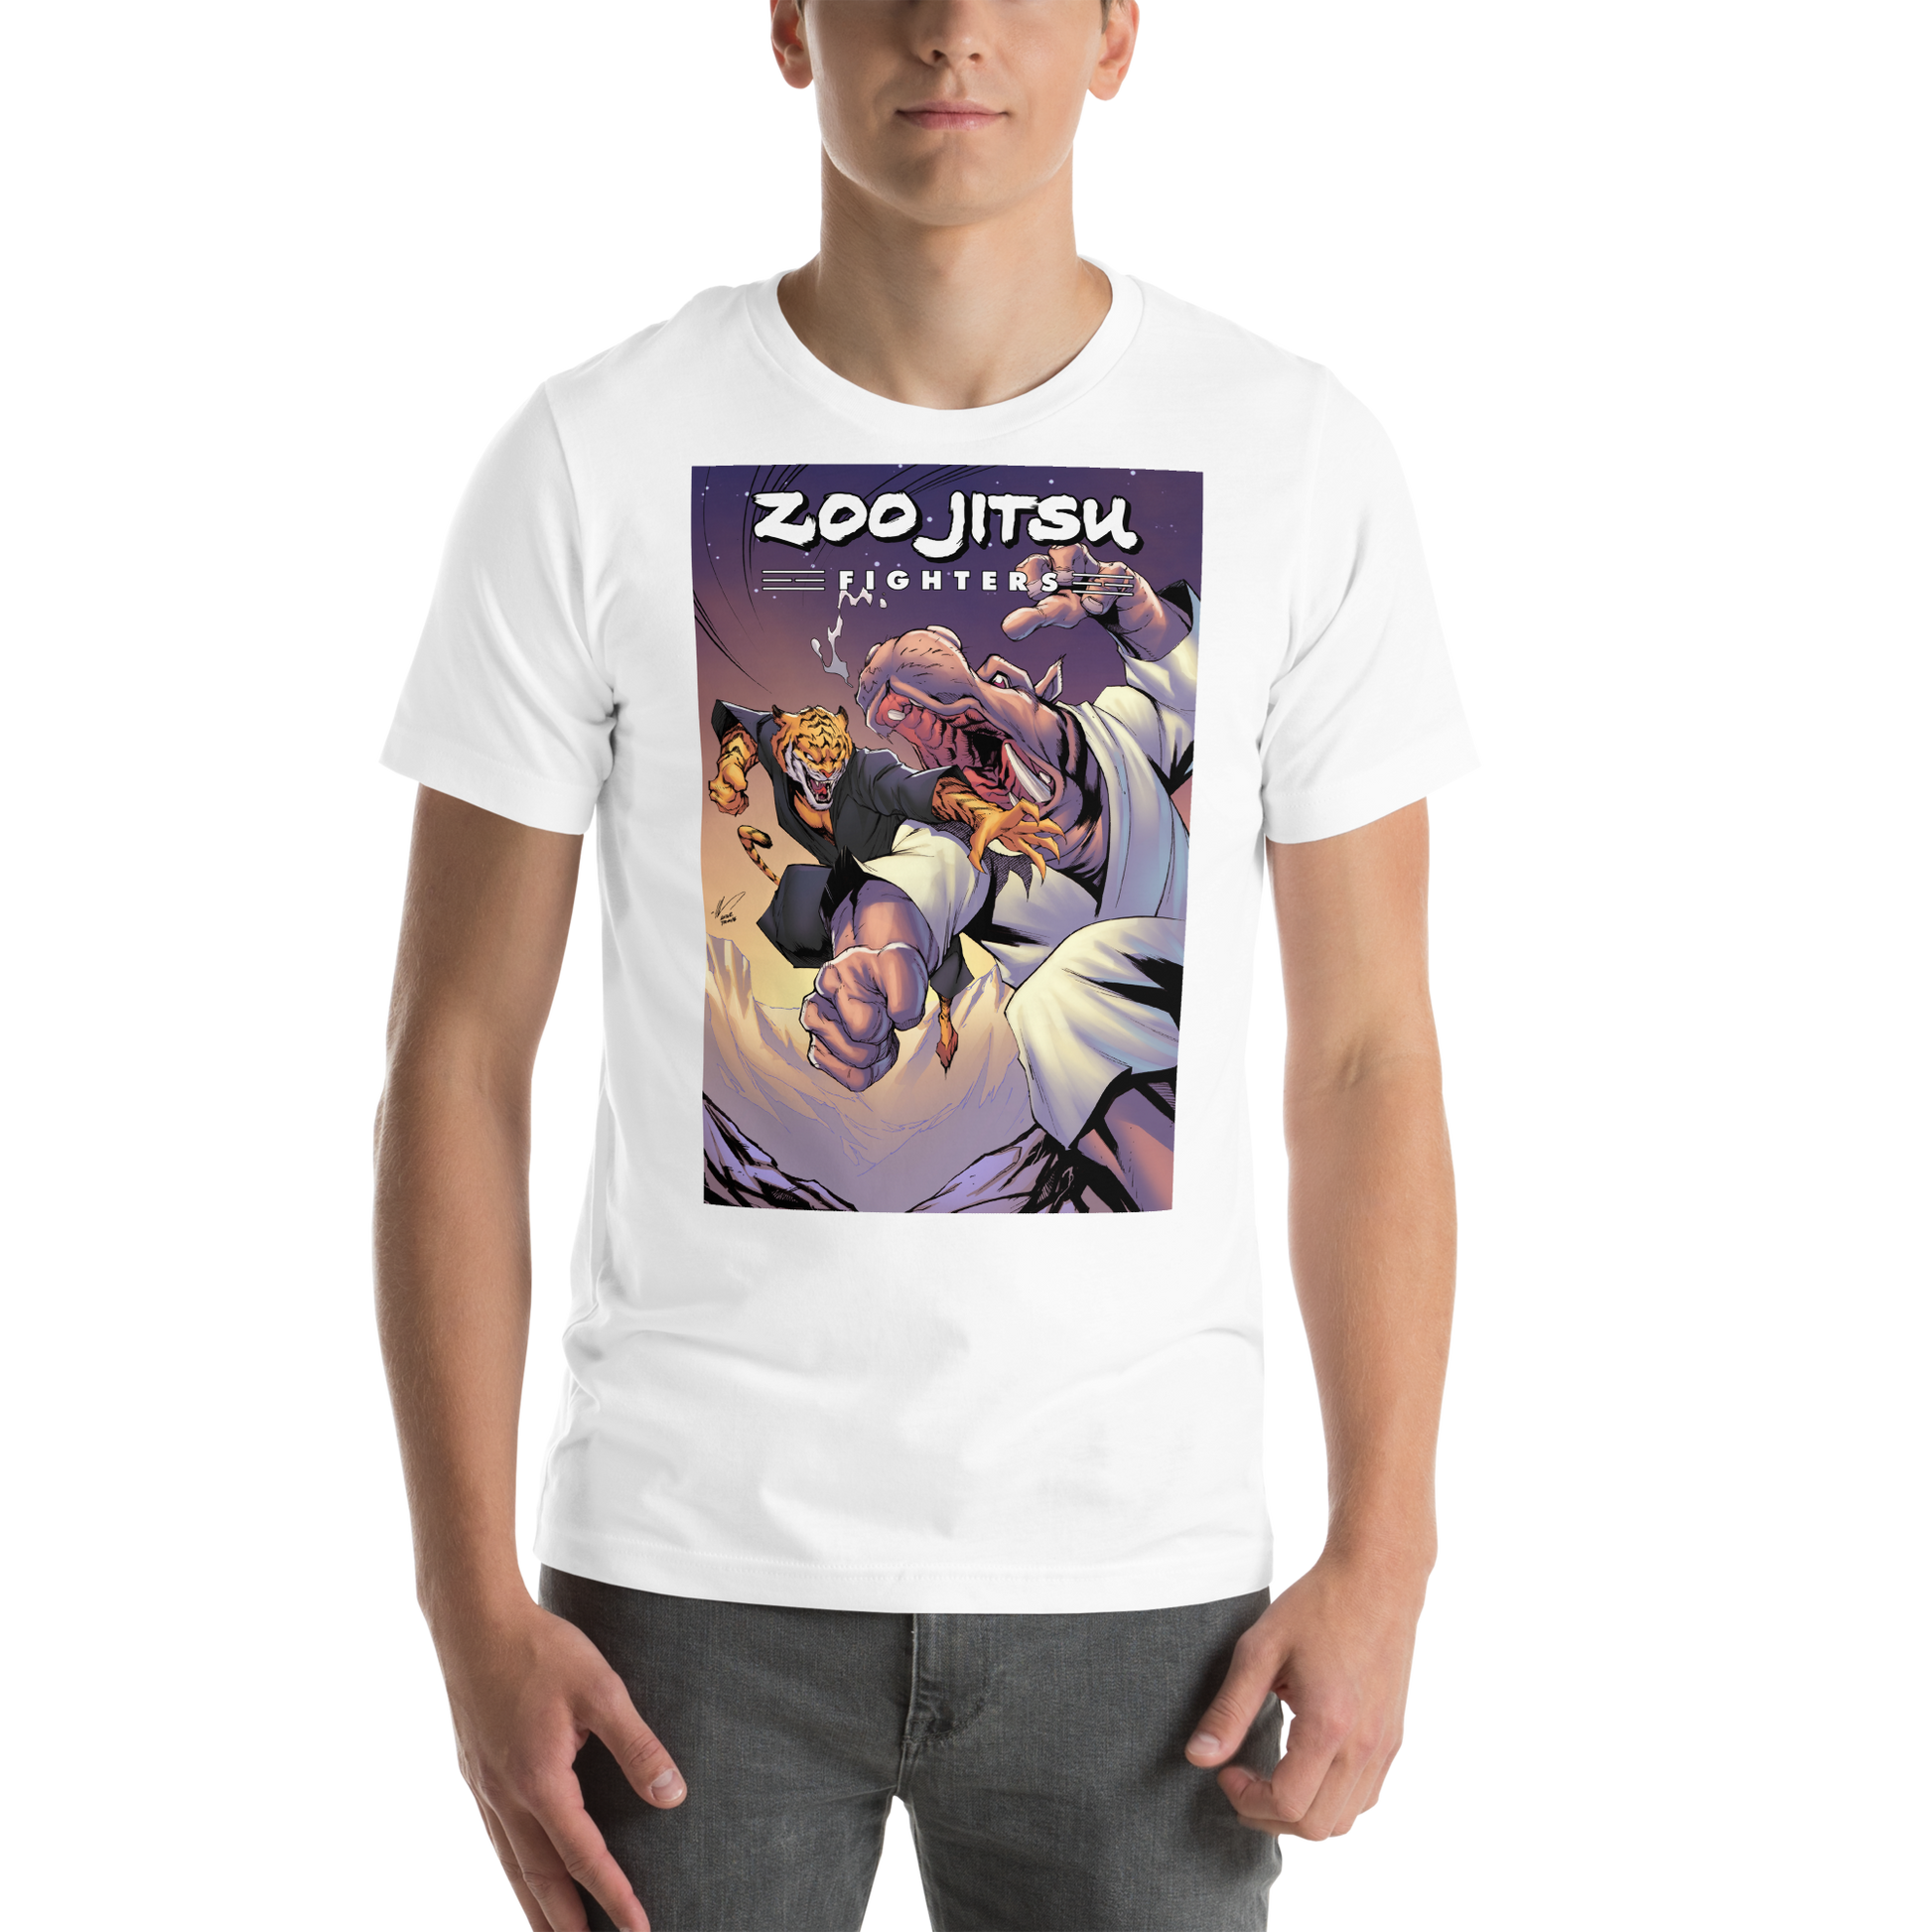 Zoo Jitsu Fighters Unisex t-shirt by Ale Garza - Icon Heroes 